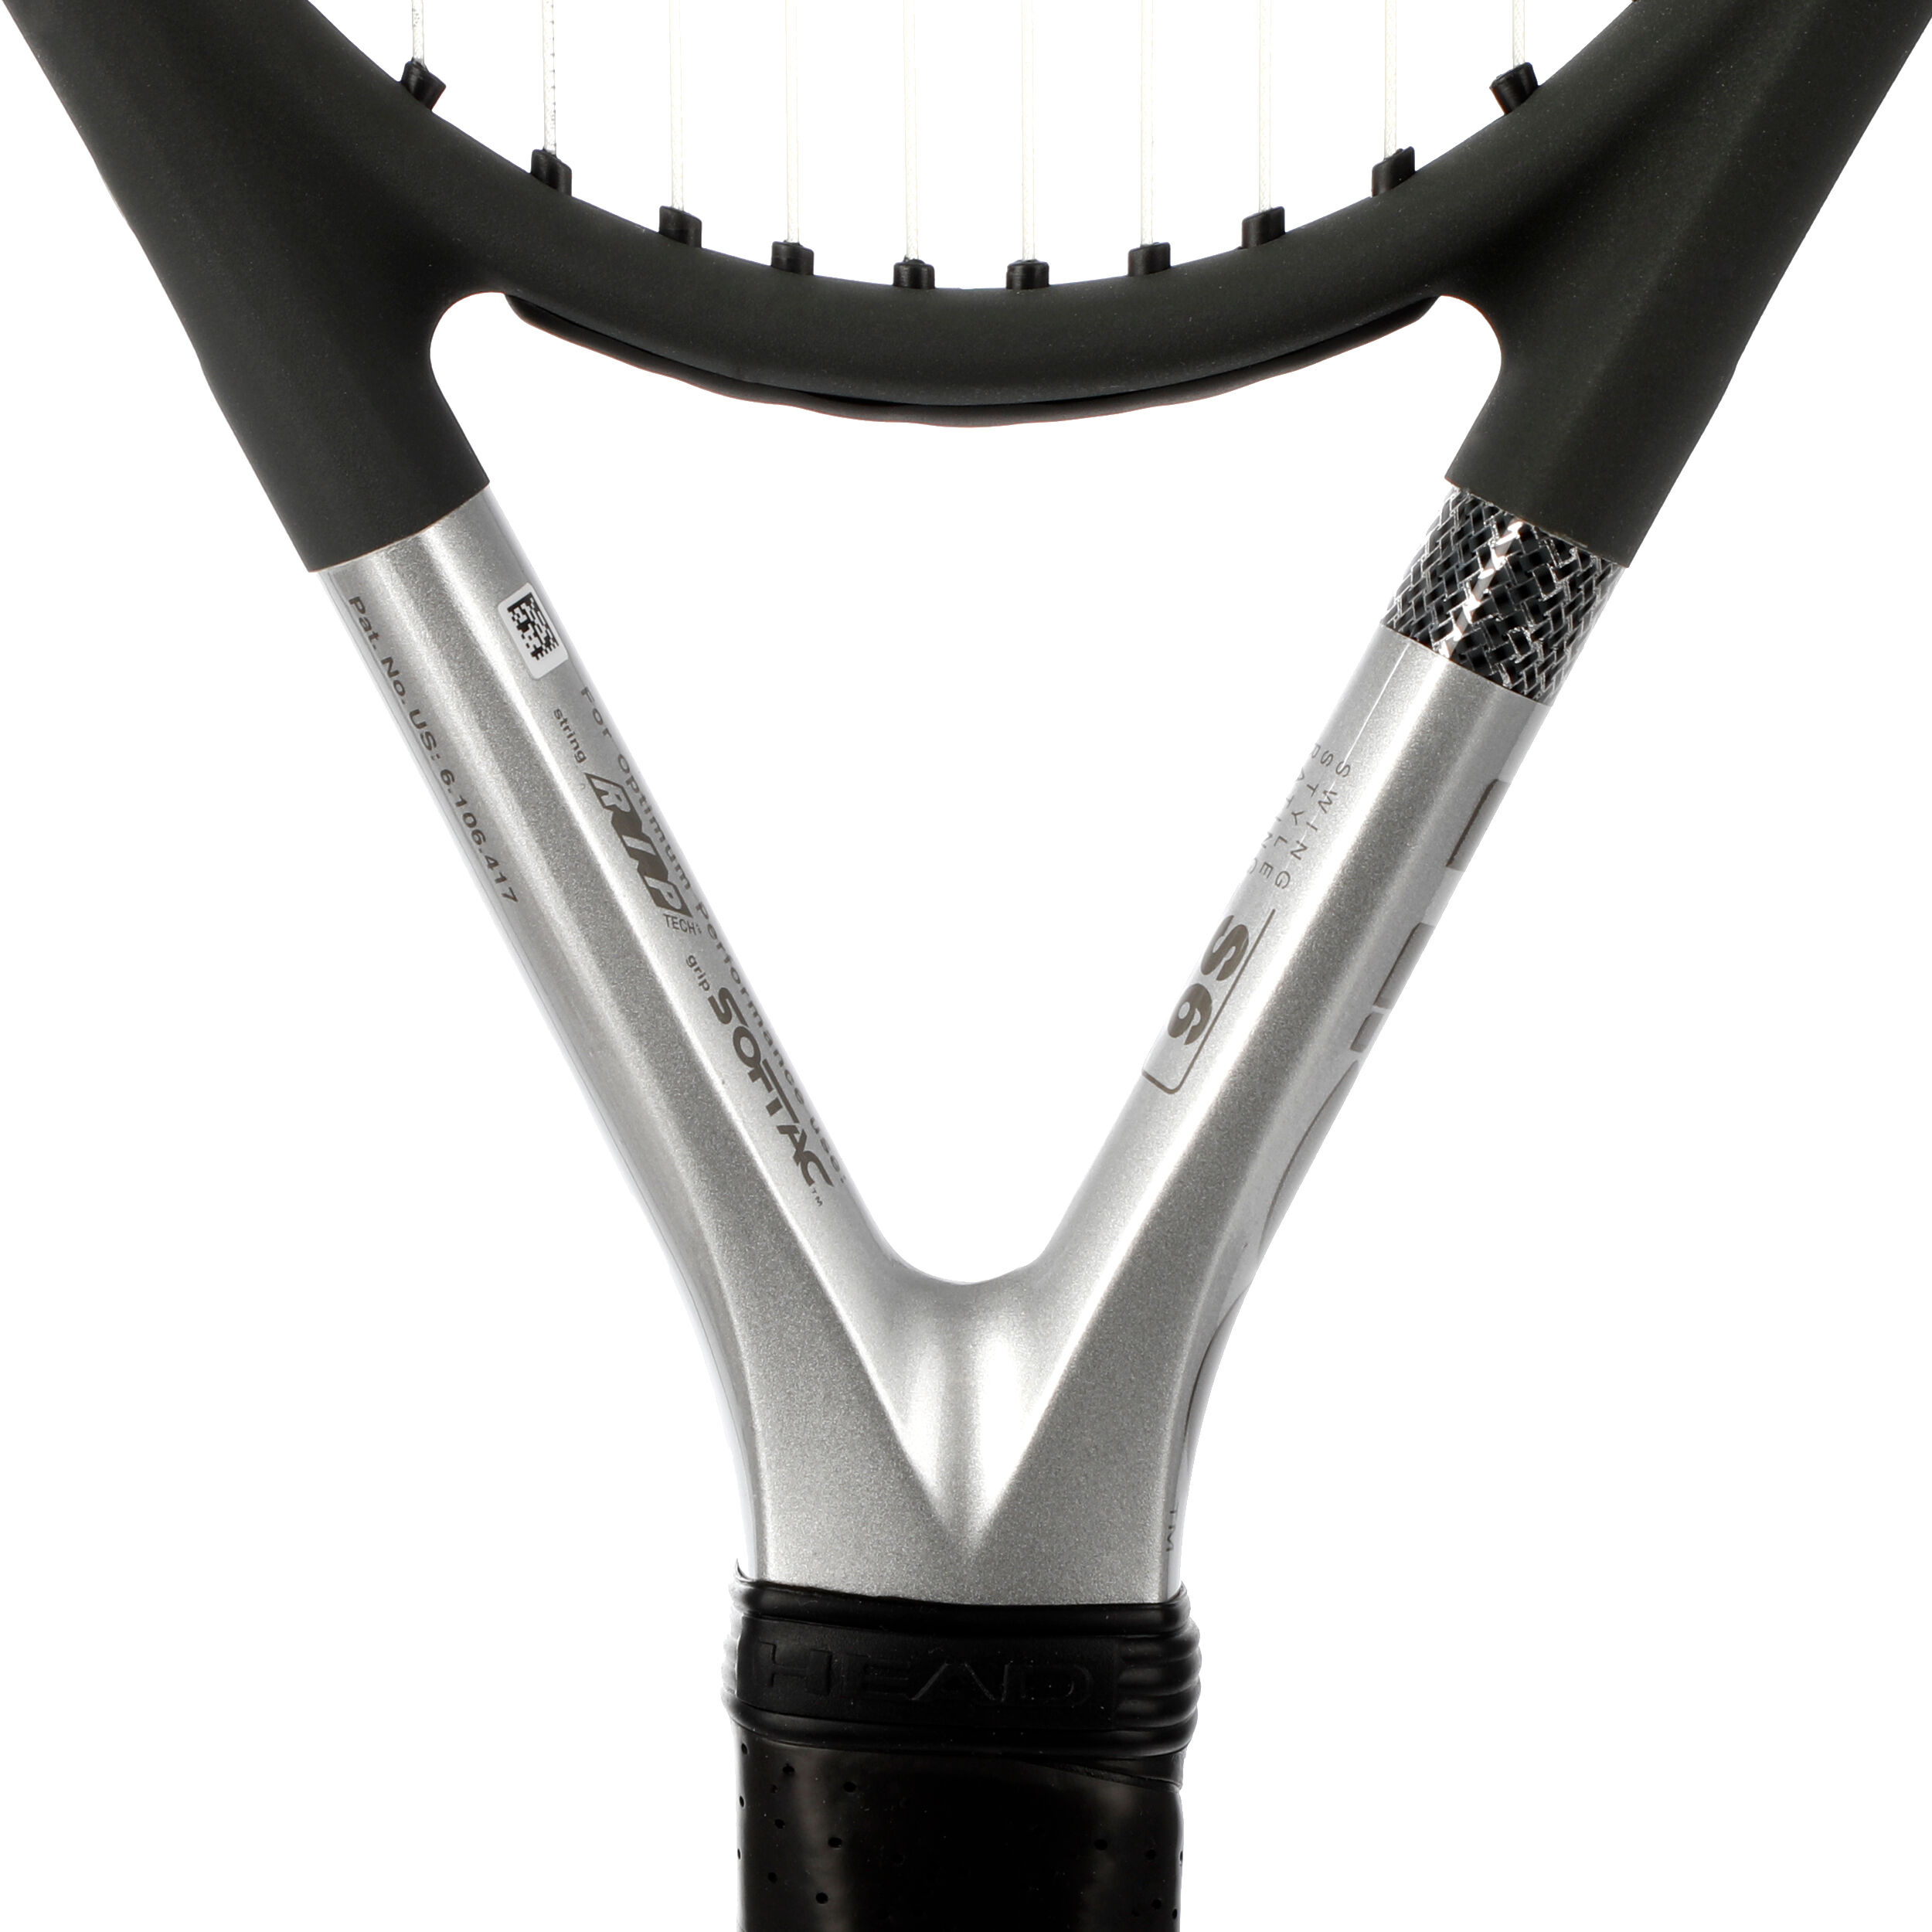 1XHead Ti S6  Tennis Racket rrp £160 GRIP SIZE L1 DPD 1 DAY UK DELIVERY. 